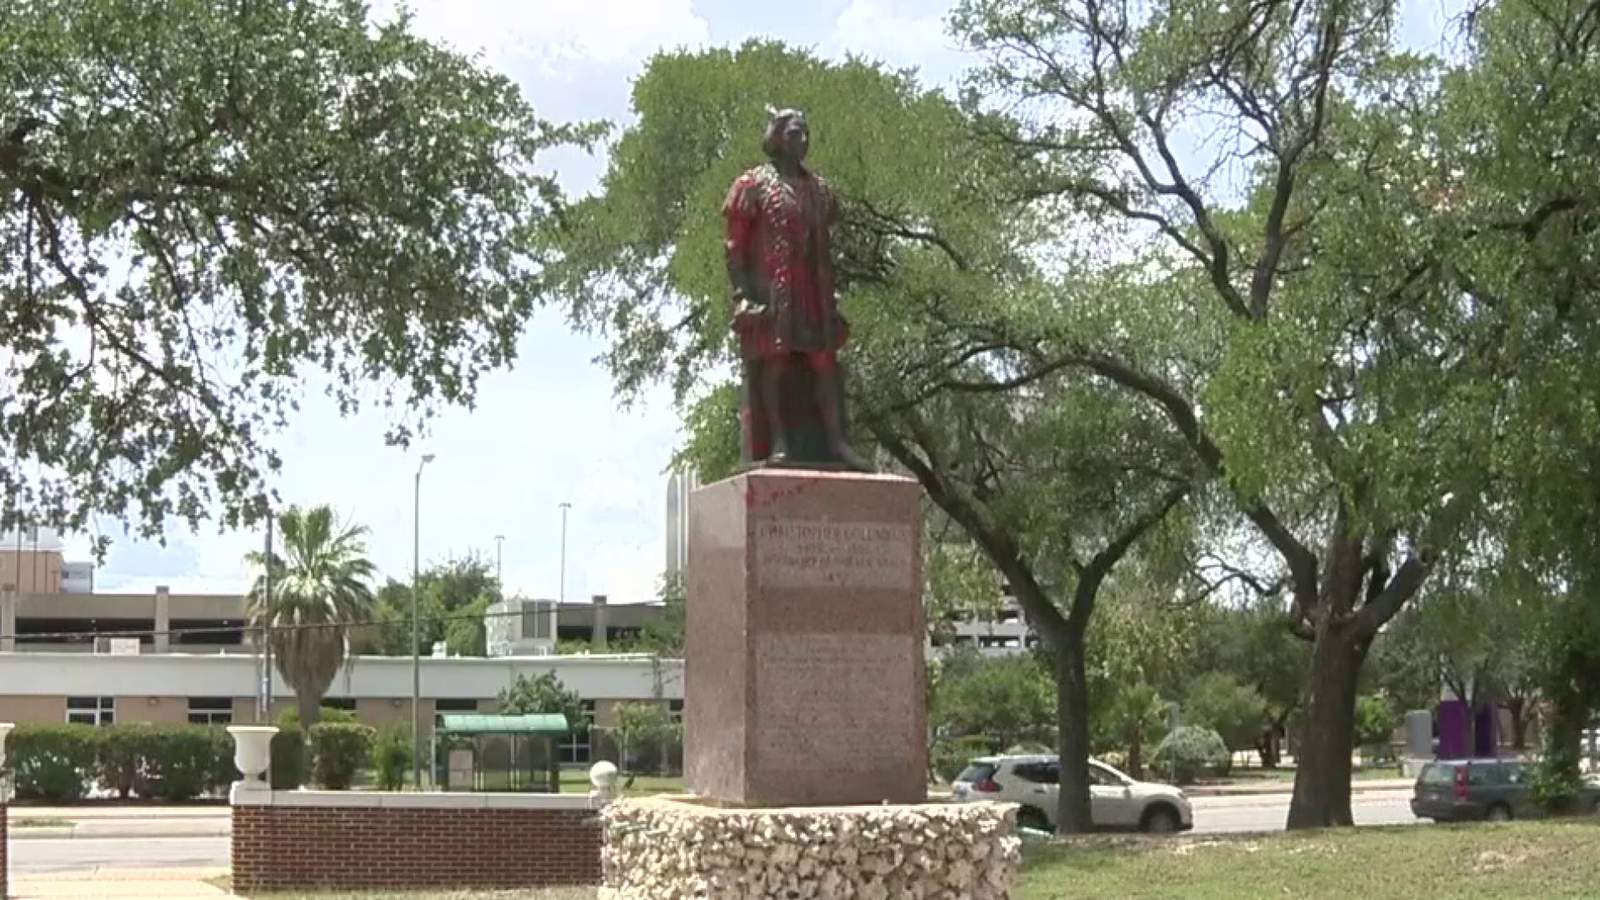 San Antonio City Council to vote on Christopher Columbus statue removal request